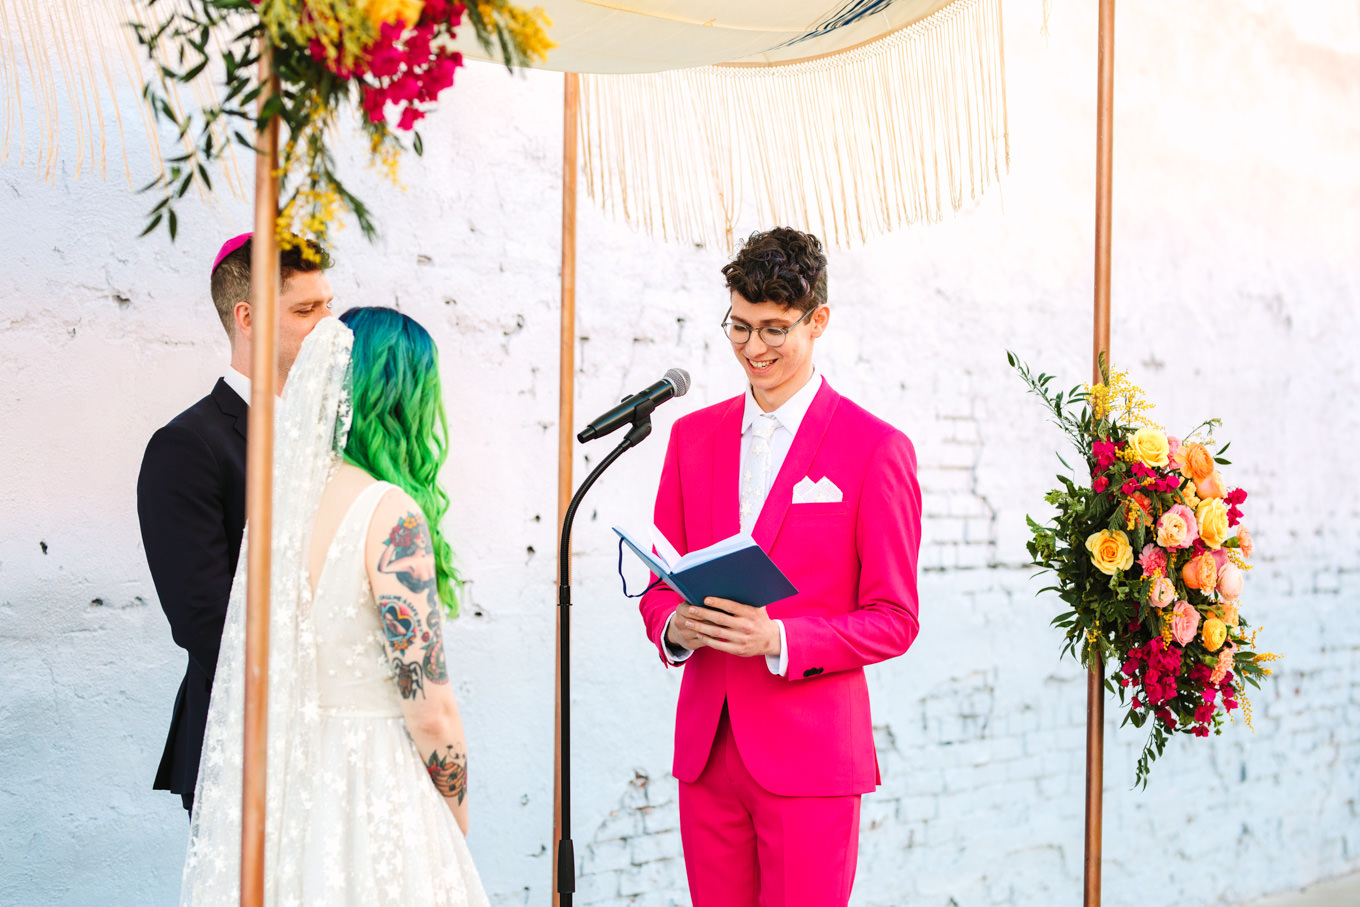 Groom in hot pink suit reading wedding vows | Colorful wedding at The Unique Space Los Angeles published in The Knot Magazine | Fresh and colorful photography for fun-loving couples in Southern California | #colorfulwedding #losangeleswedding #weddingphotography #uniquespace Source: Mary Costa Photography | Los Angeles